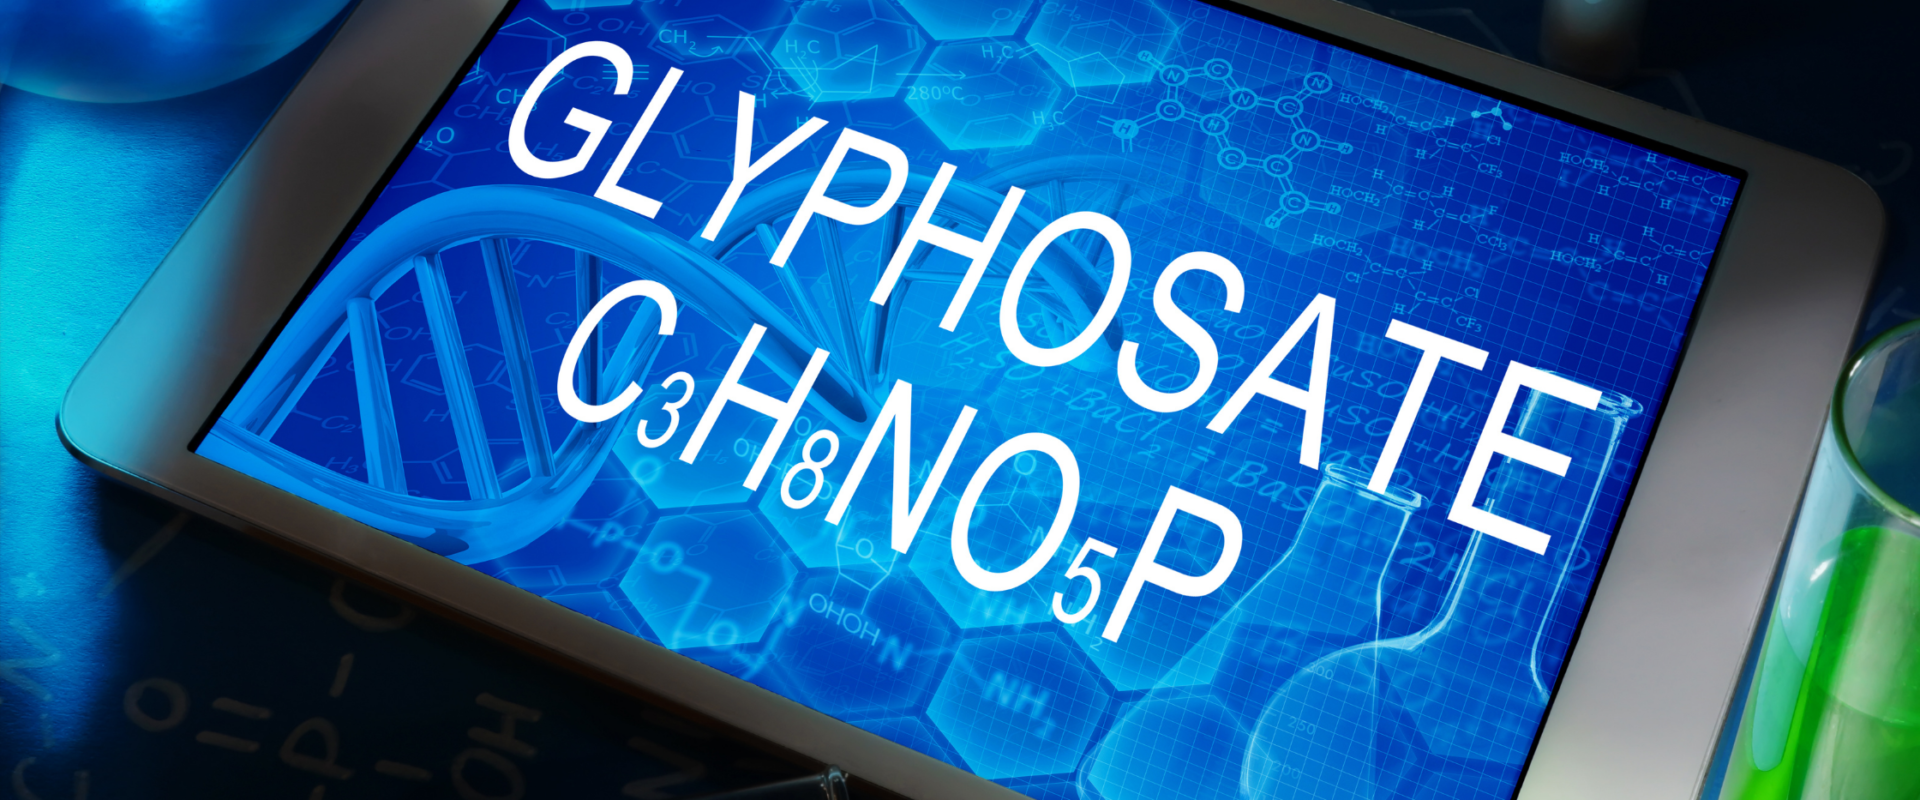 glyphosate is destroying our health